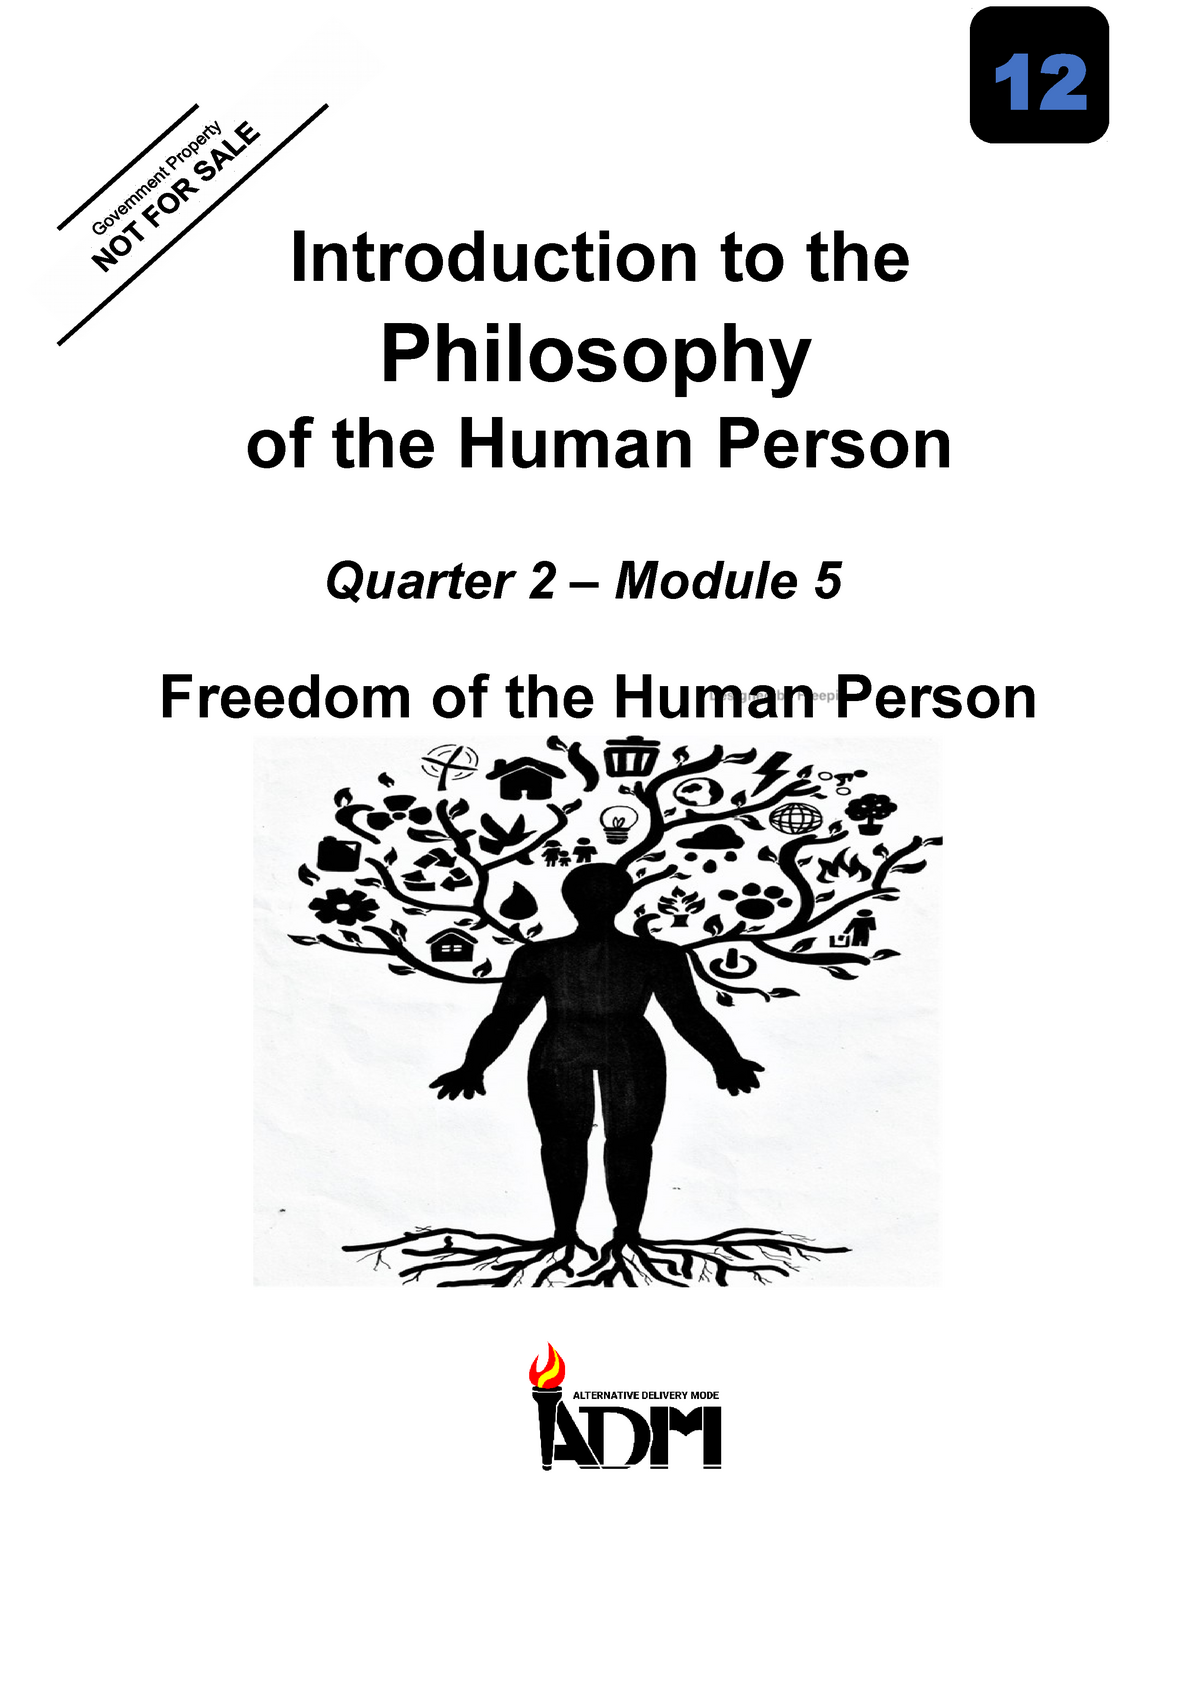 Q2 Module 5 Introduction To The Philosophy Of The Human Person 1066